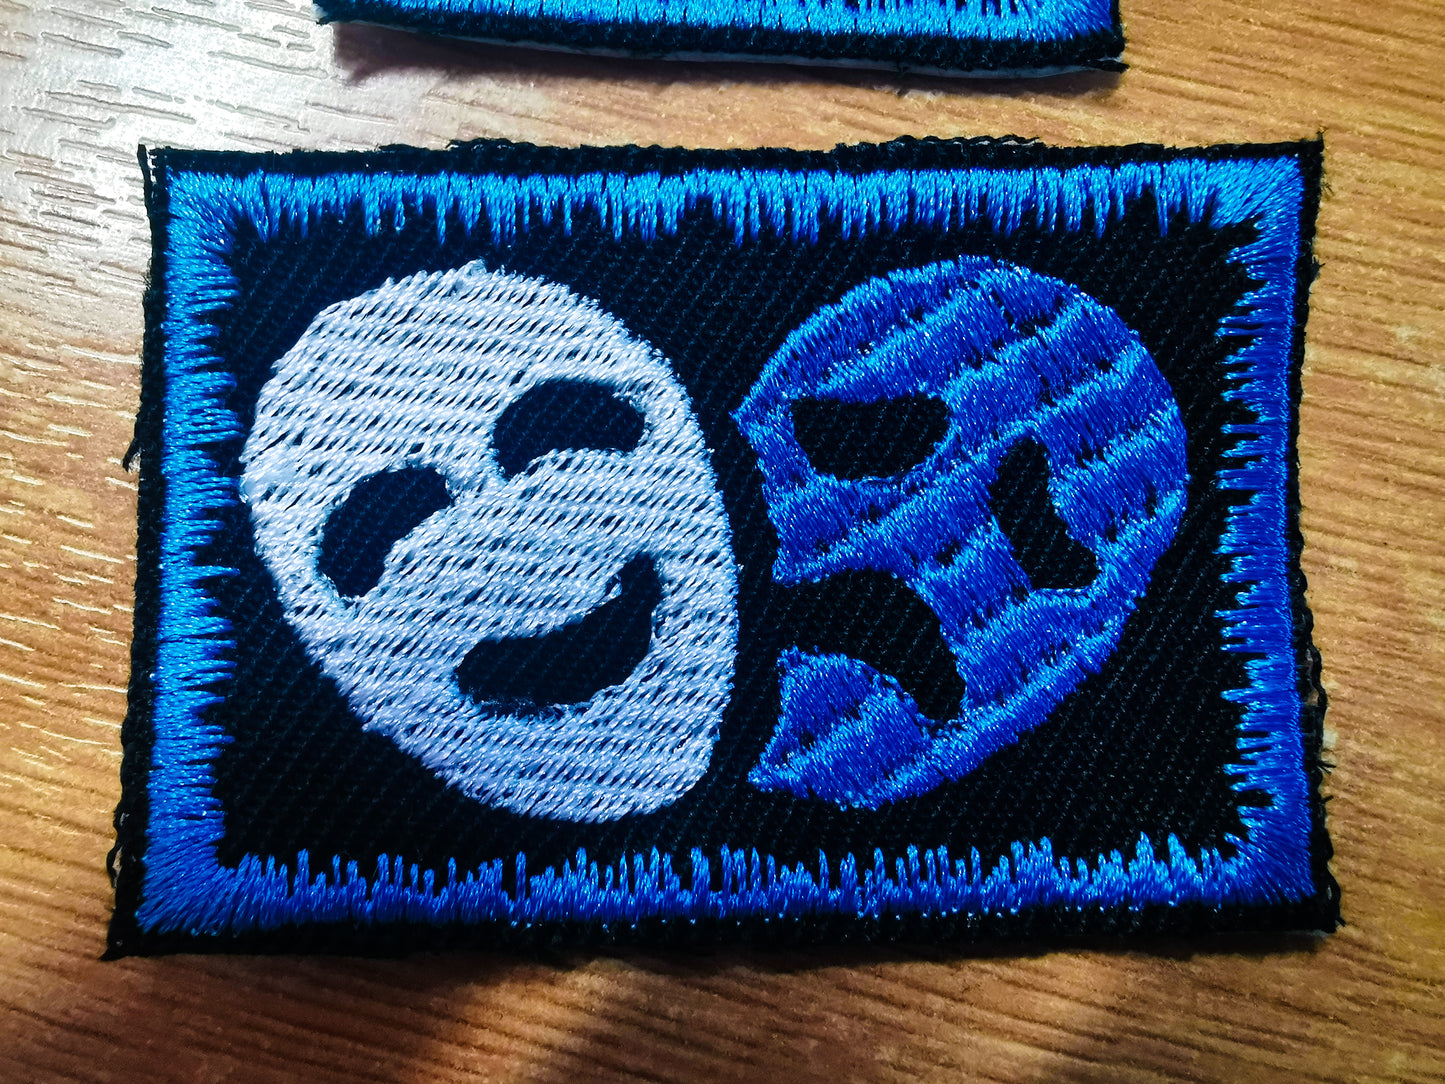 Bipolar Disorder Embroidered Patch Subtle Symbol for Vibrant Aqua Disability and Mental Health Awareness